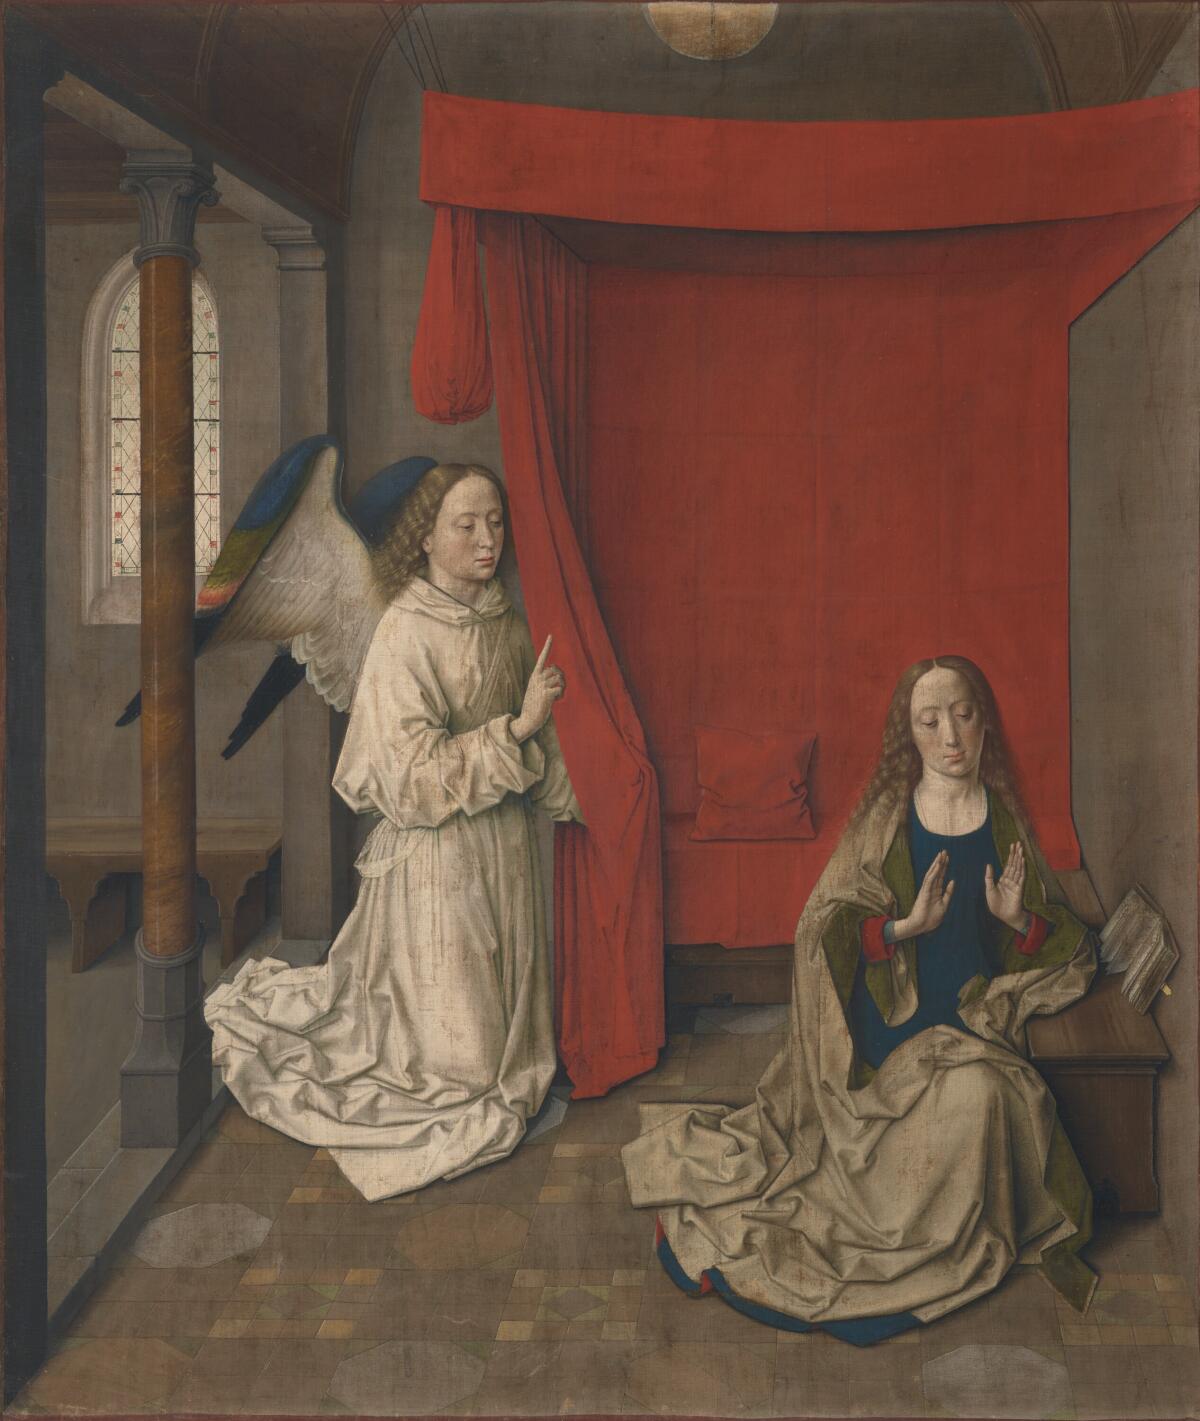 Dieric Bouts, “The Annunciation,” about 1450-55, distemper on linen